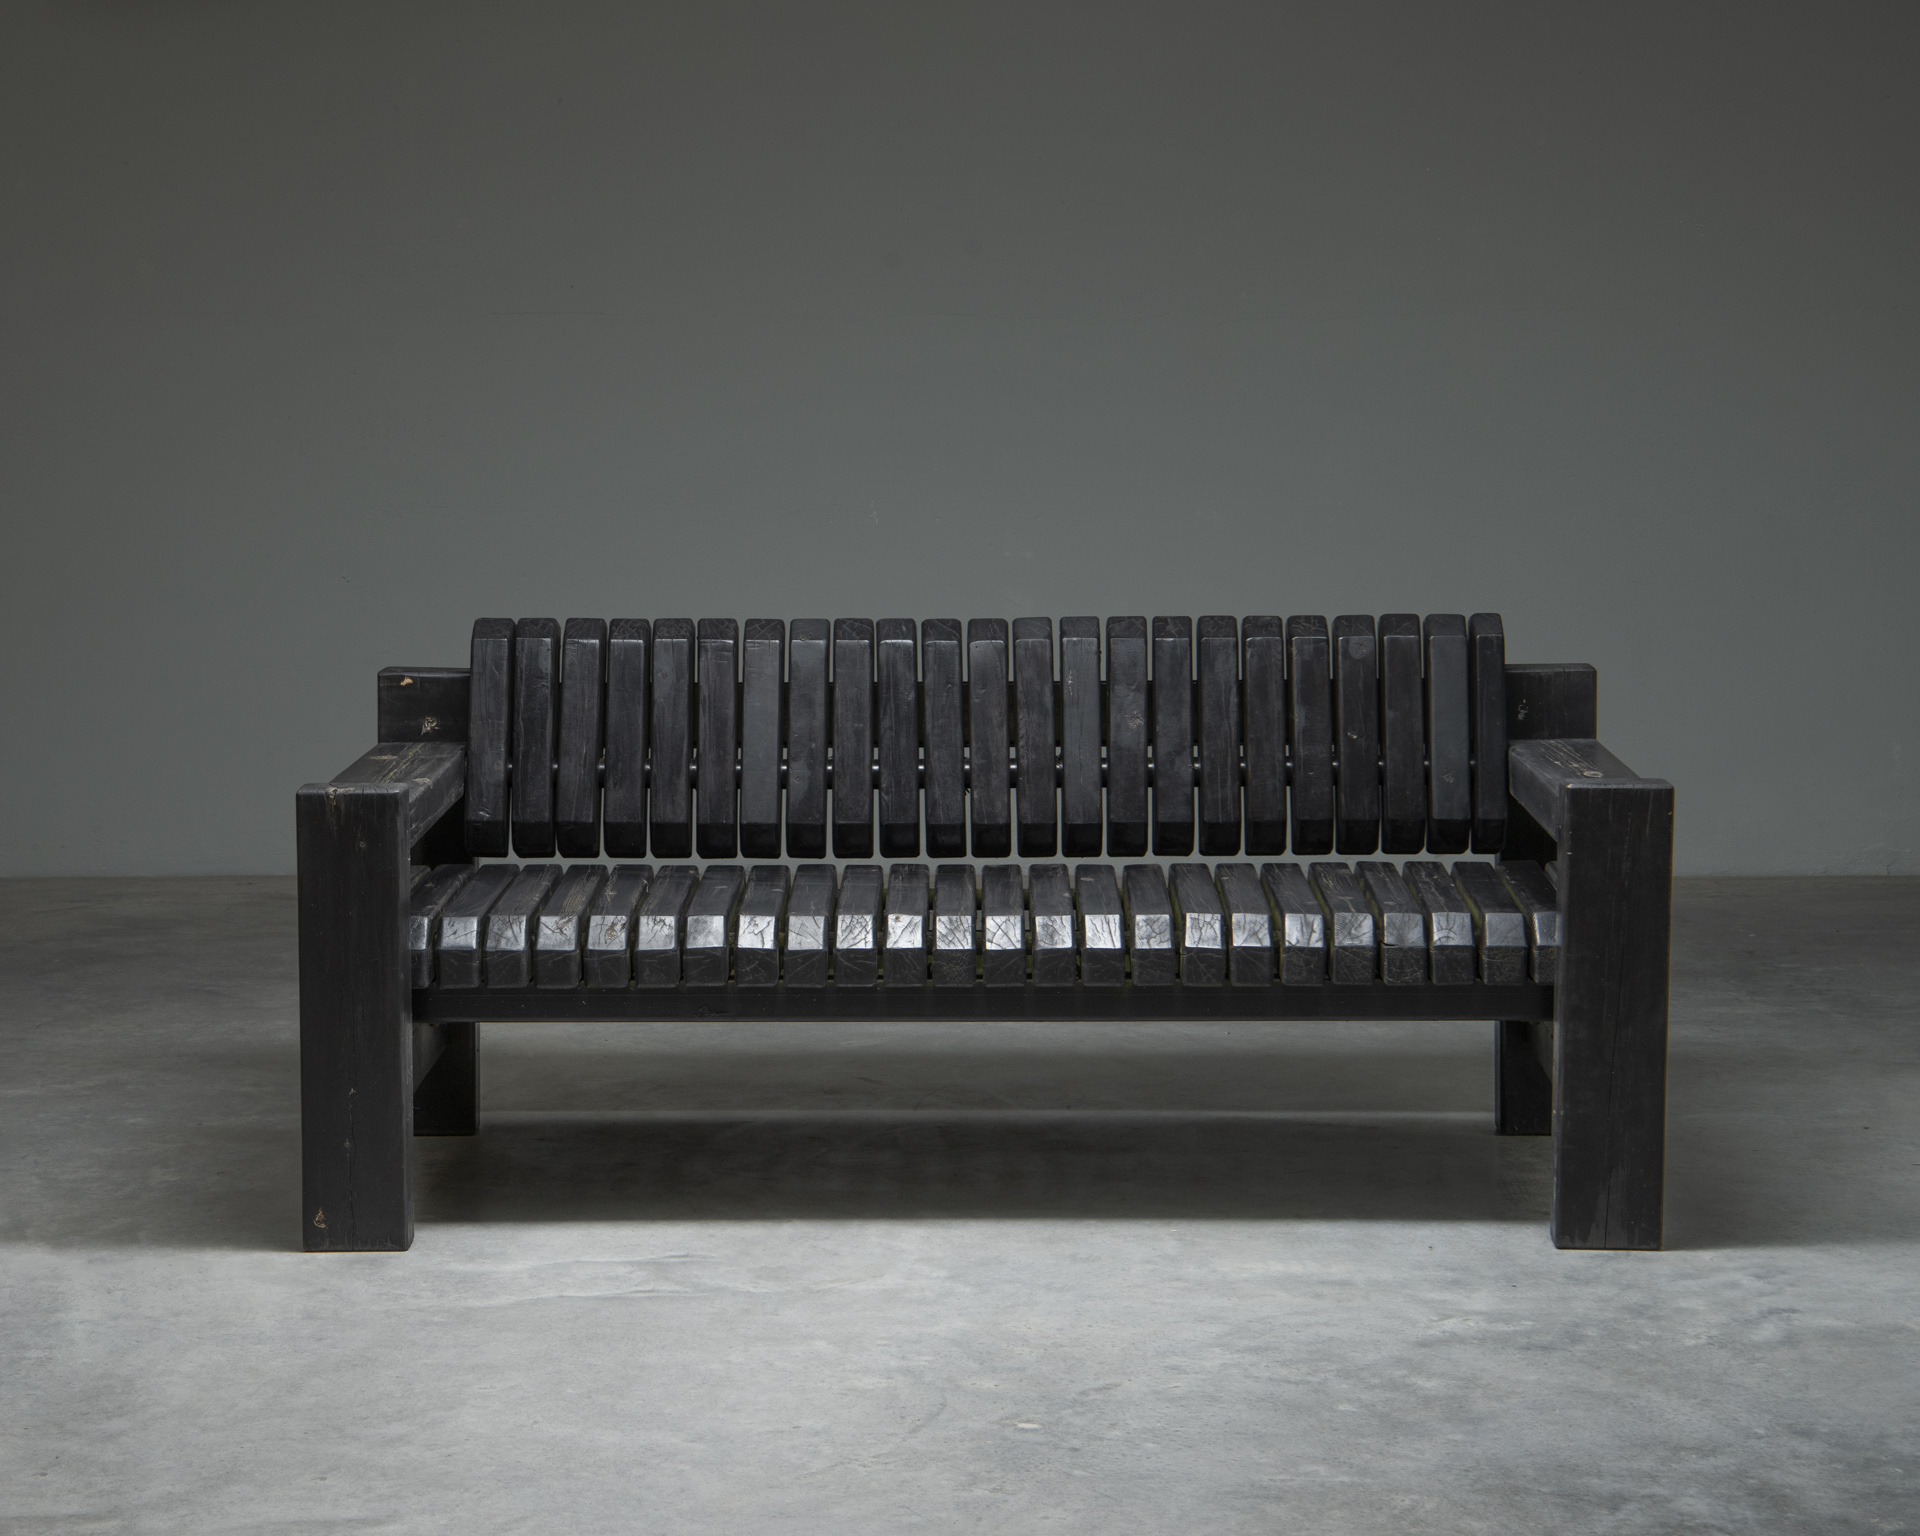 3725brutalist-bench-black-lacquered-wood-1